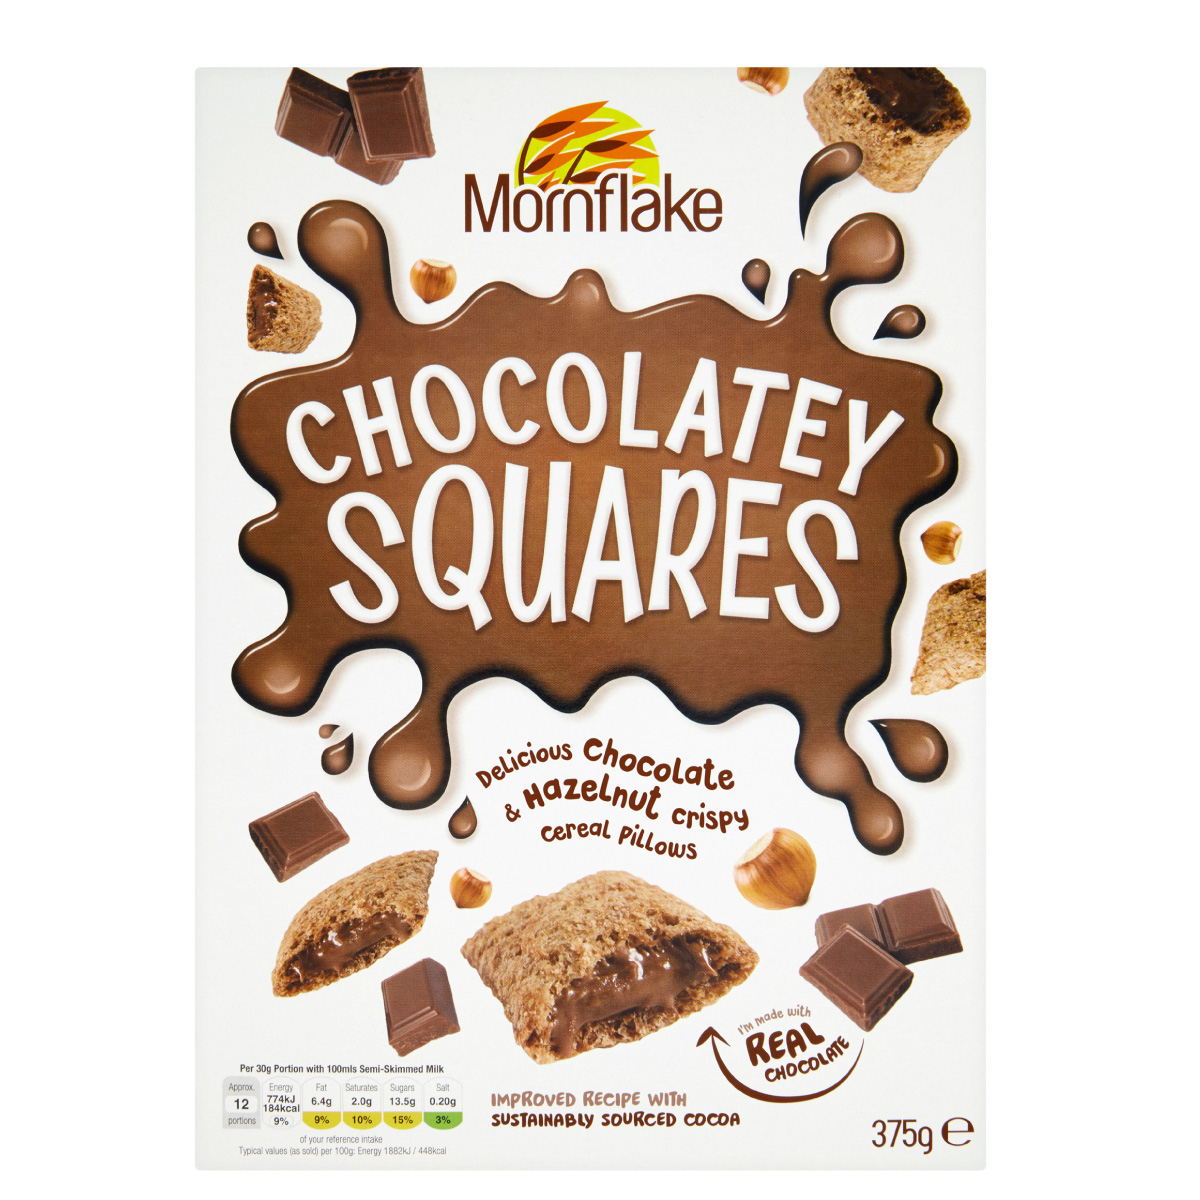 Mornflake Chocolatey Squares Cereal Pillows (375g)